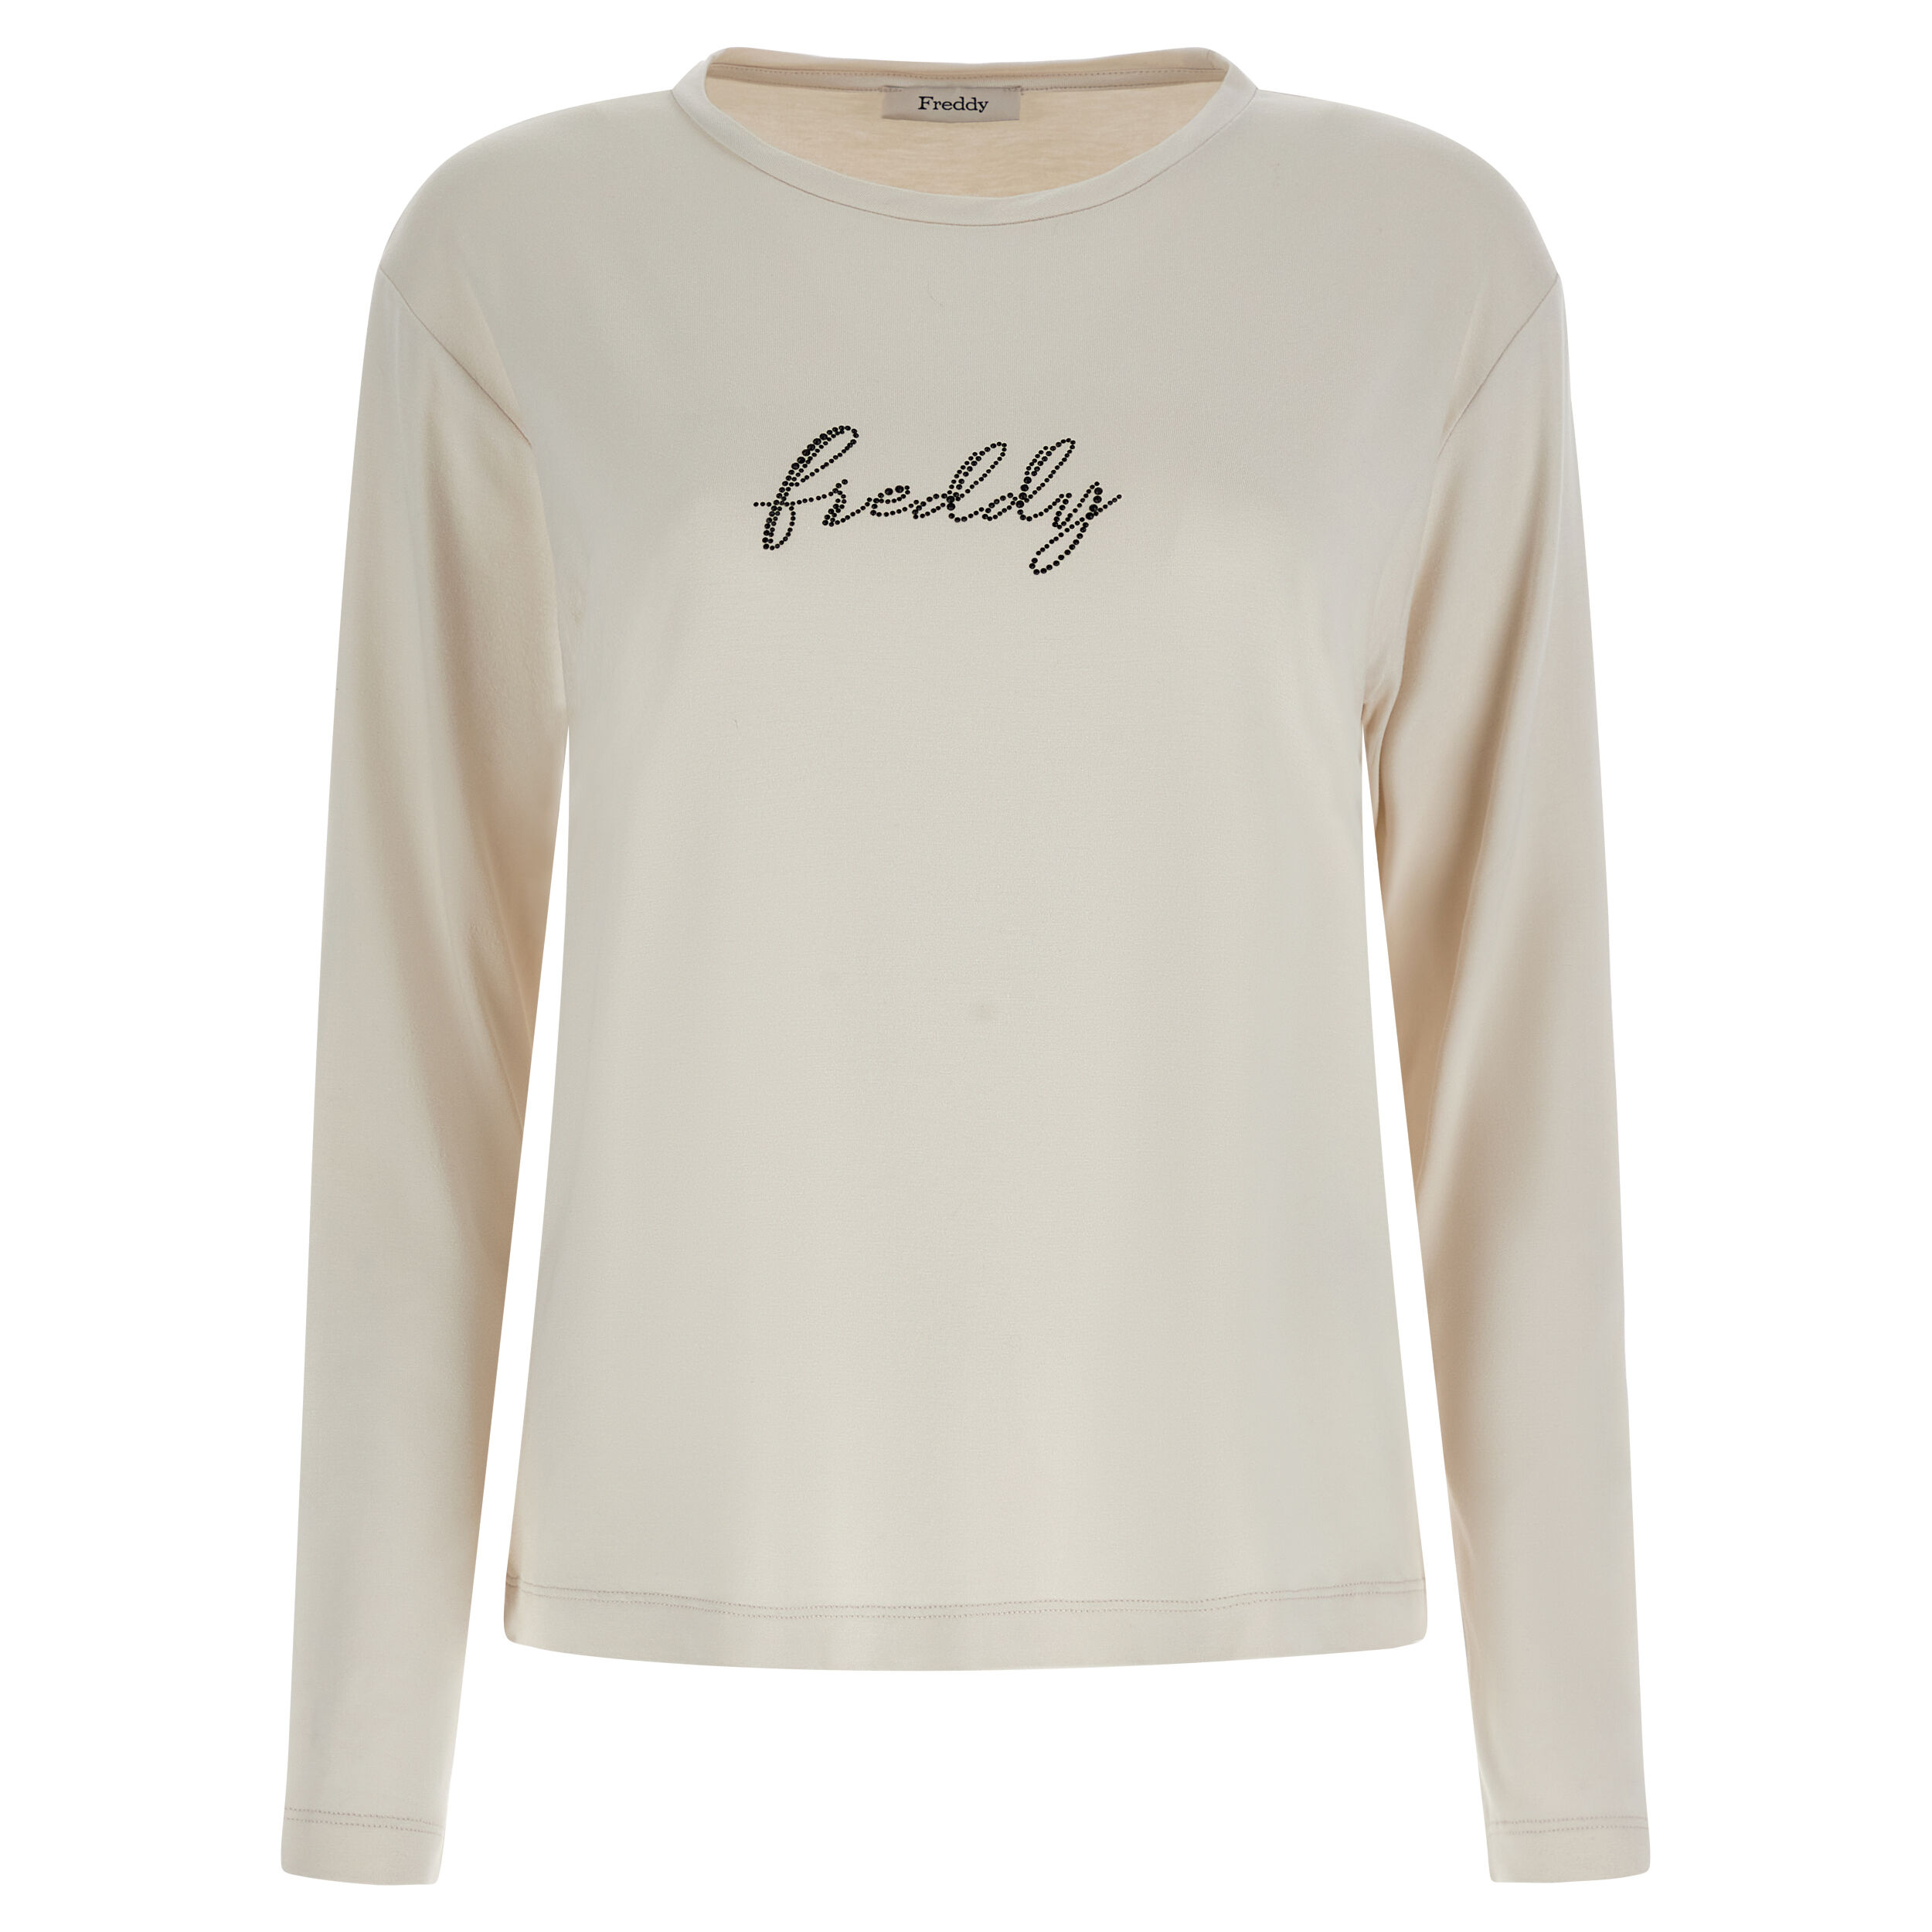 Freddy T-shirt manica lunga in jersey viscosa con logo in strass White Sand Donna Large